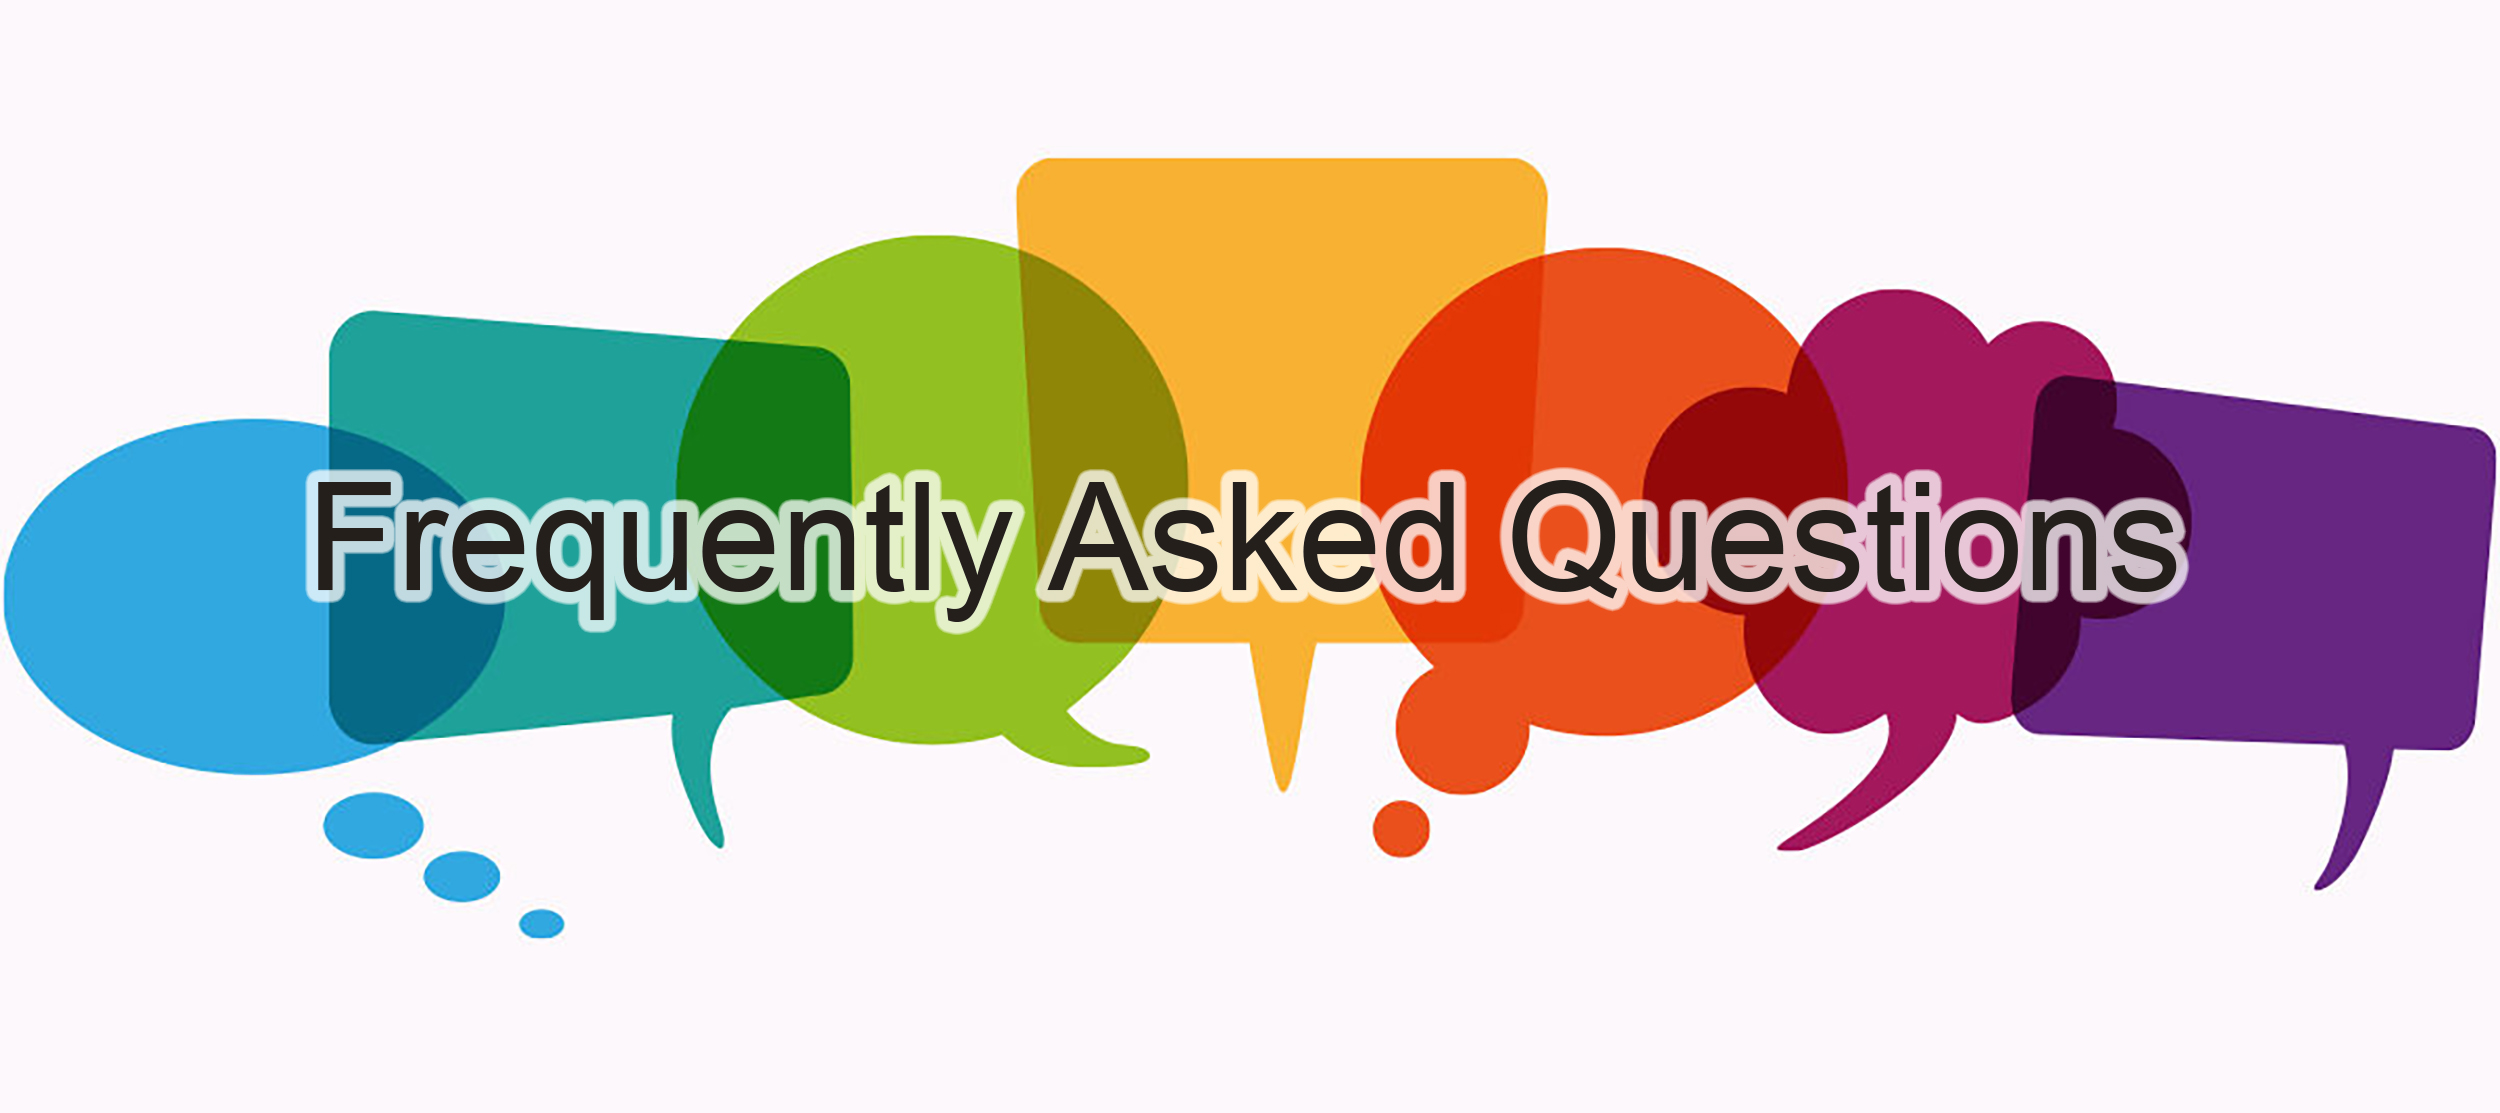 Frequently Asked Questions graphic with chat bubbles